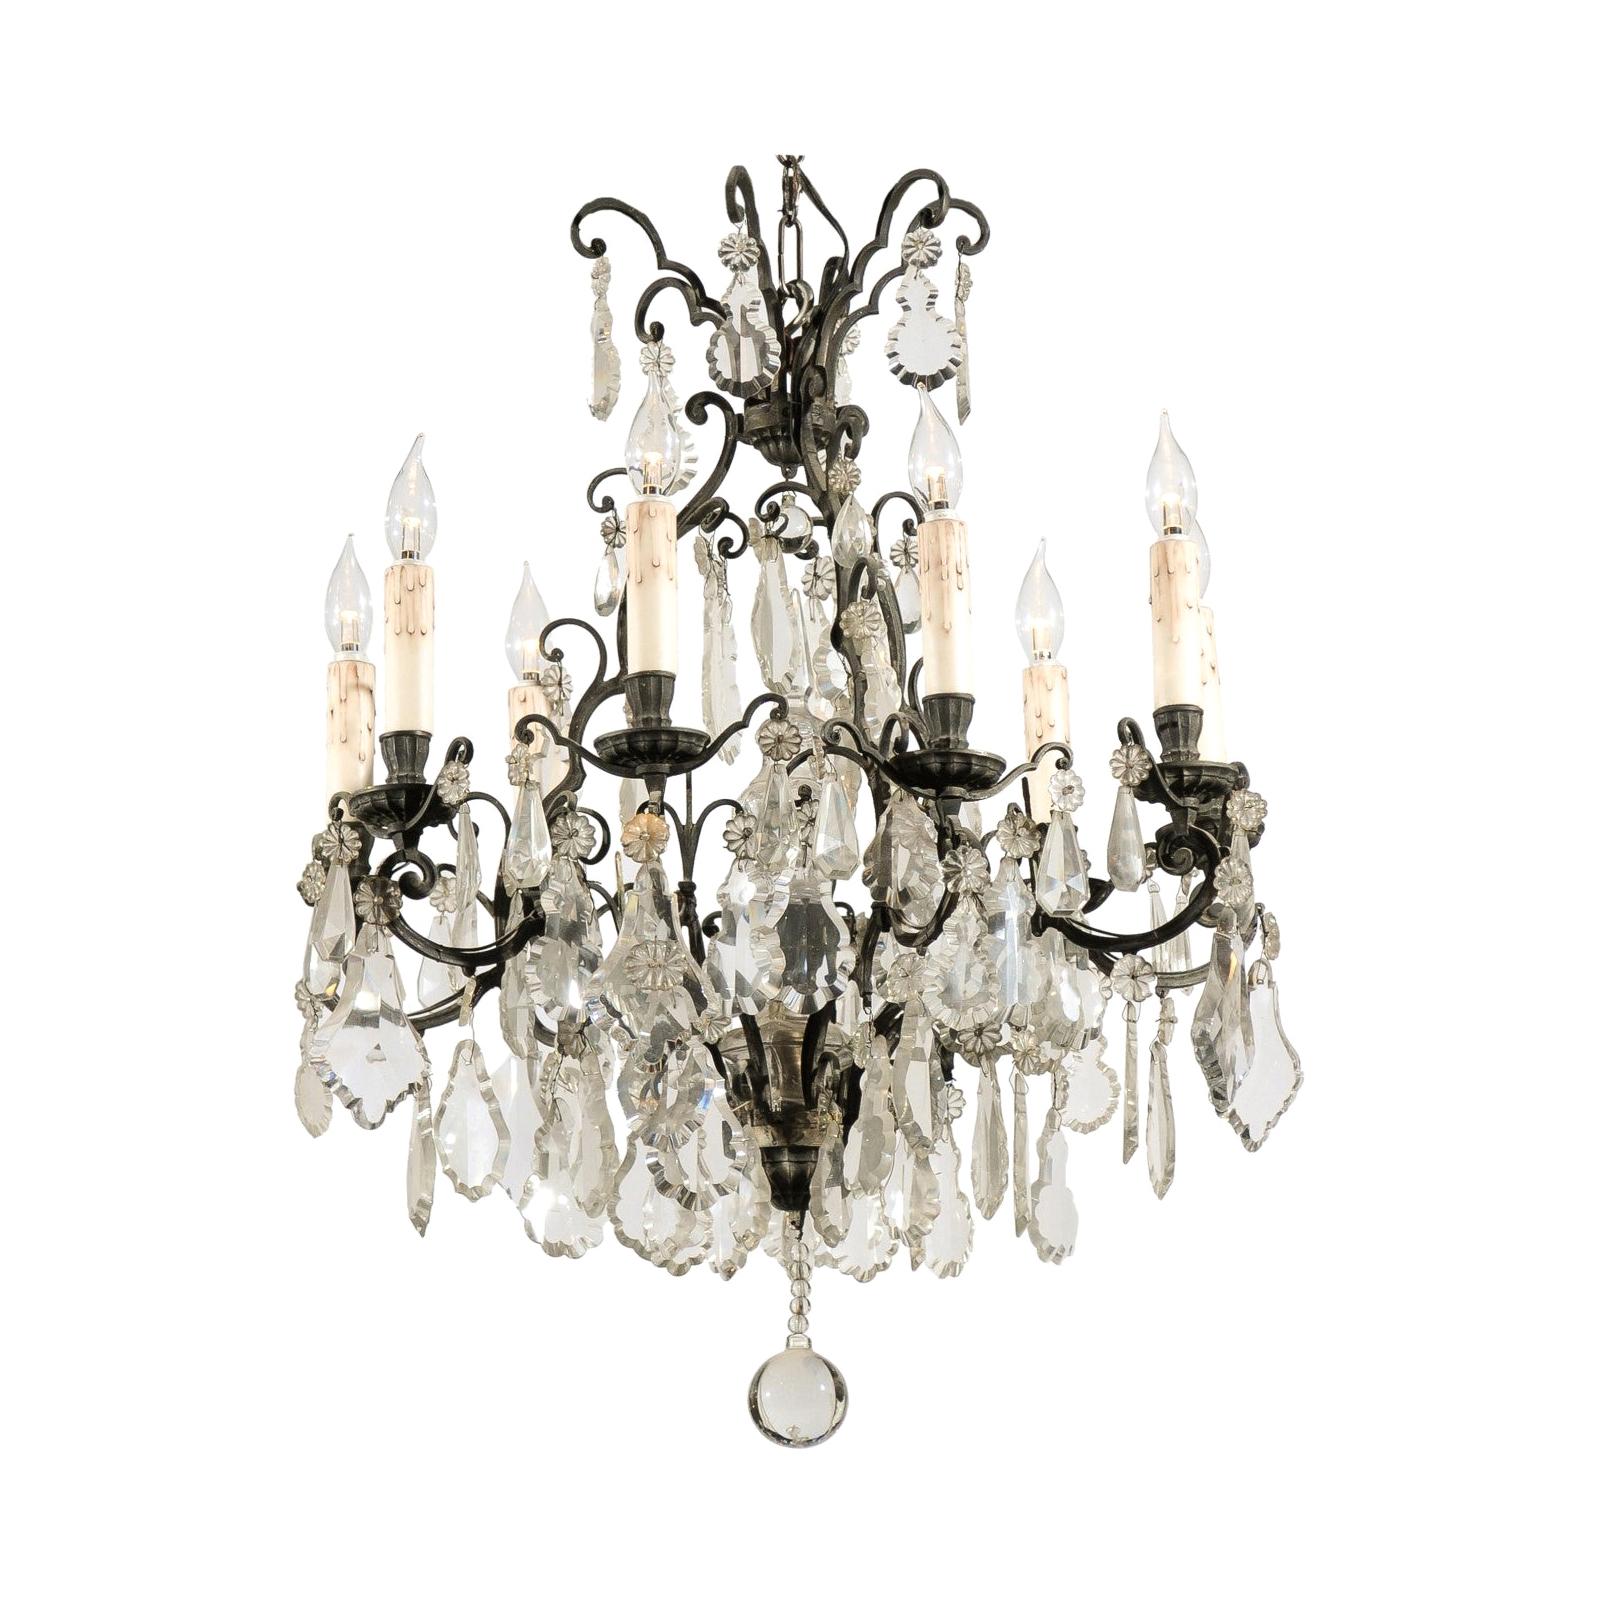 French Nine-Light Crystal Chandelier with Iron Scrolling Armature, circa 1890